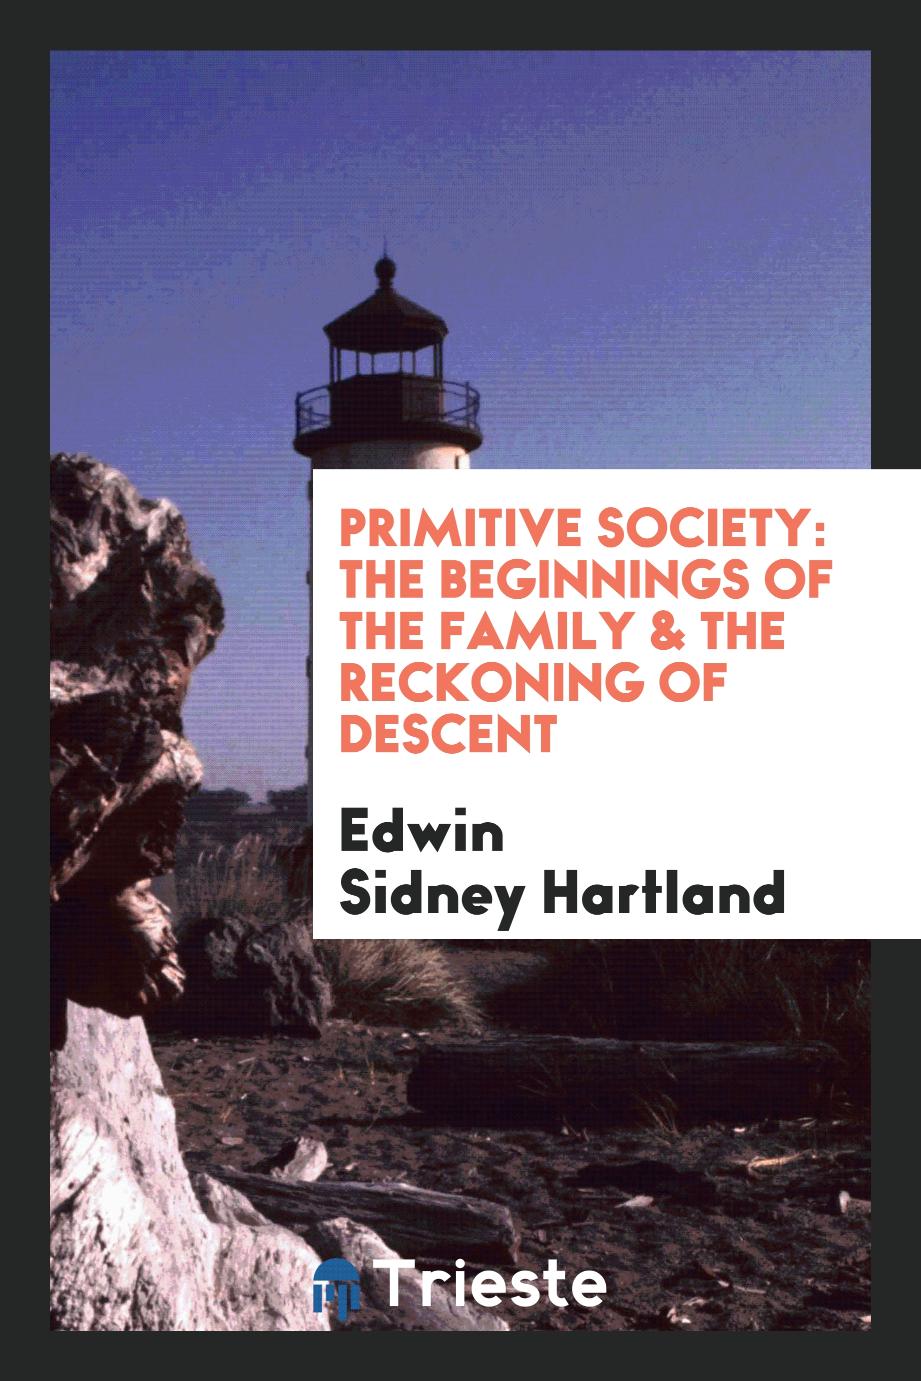 Primitive society: the beginnings of the family & the reckoning of descent